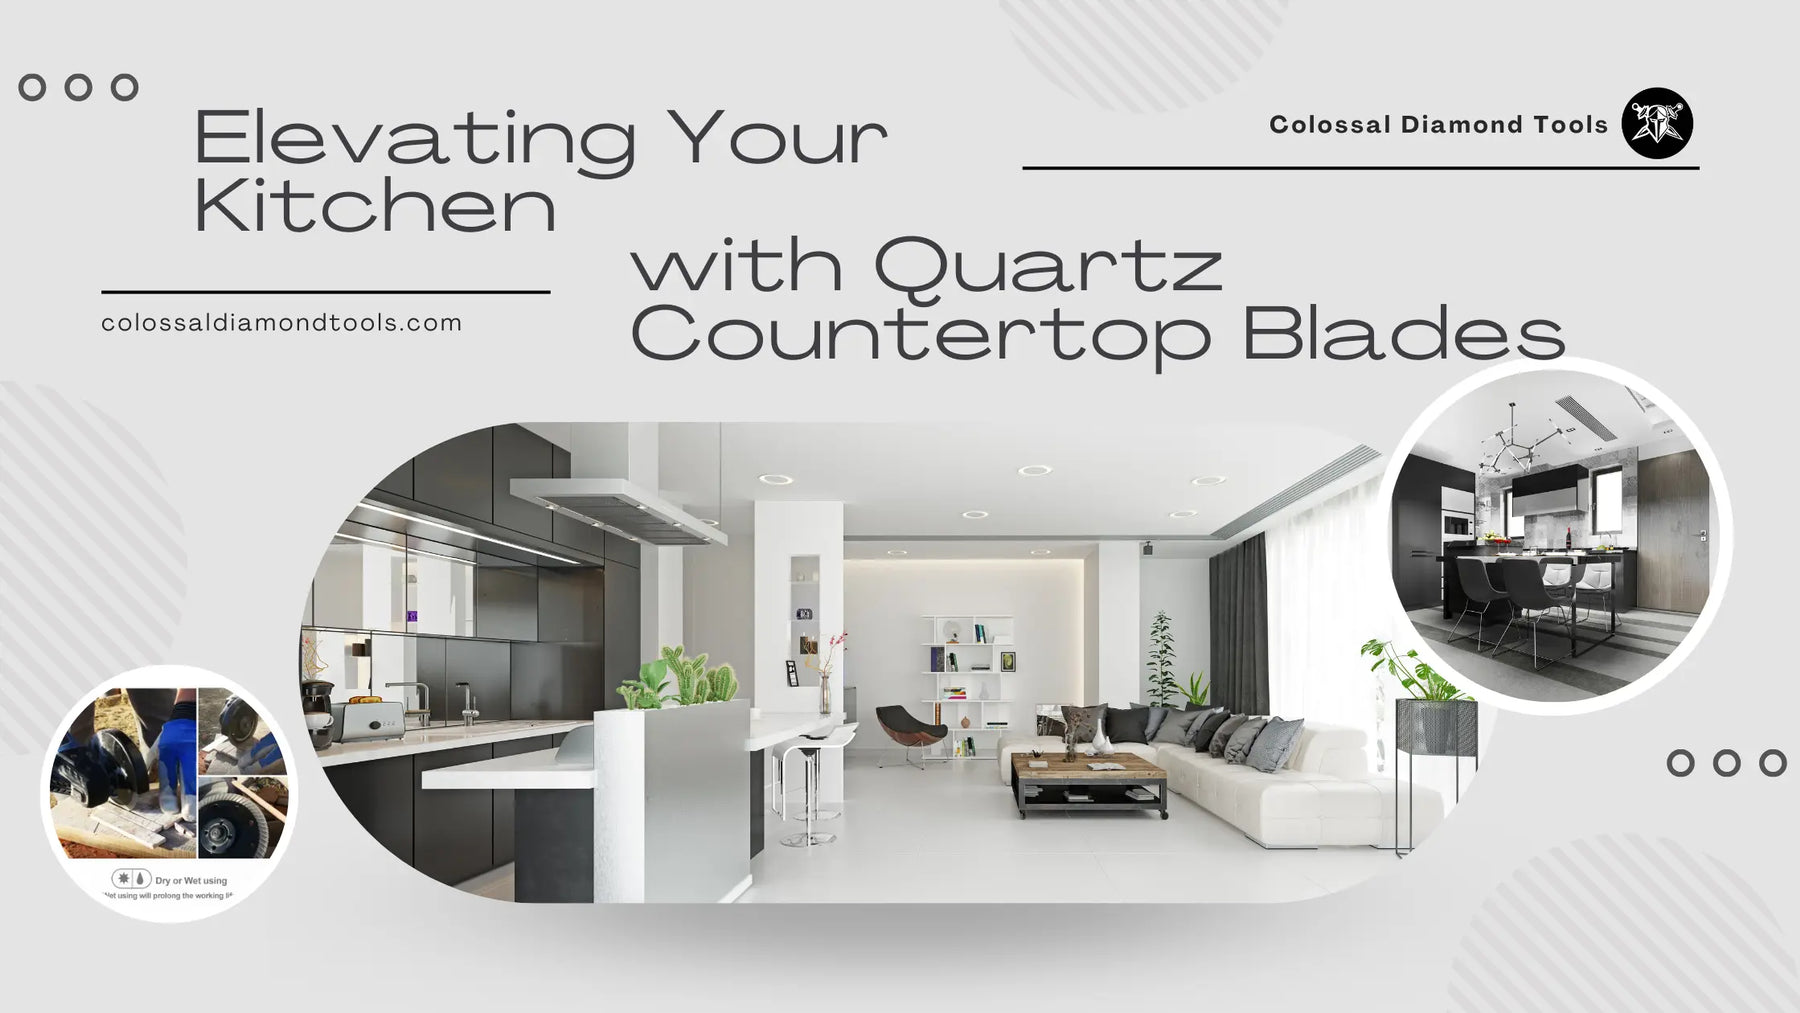 Elevating-Your-Kitchen-with-Quartz-Countertop-Blades Colossal Diamond Tools, LLC